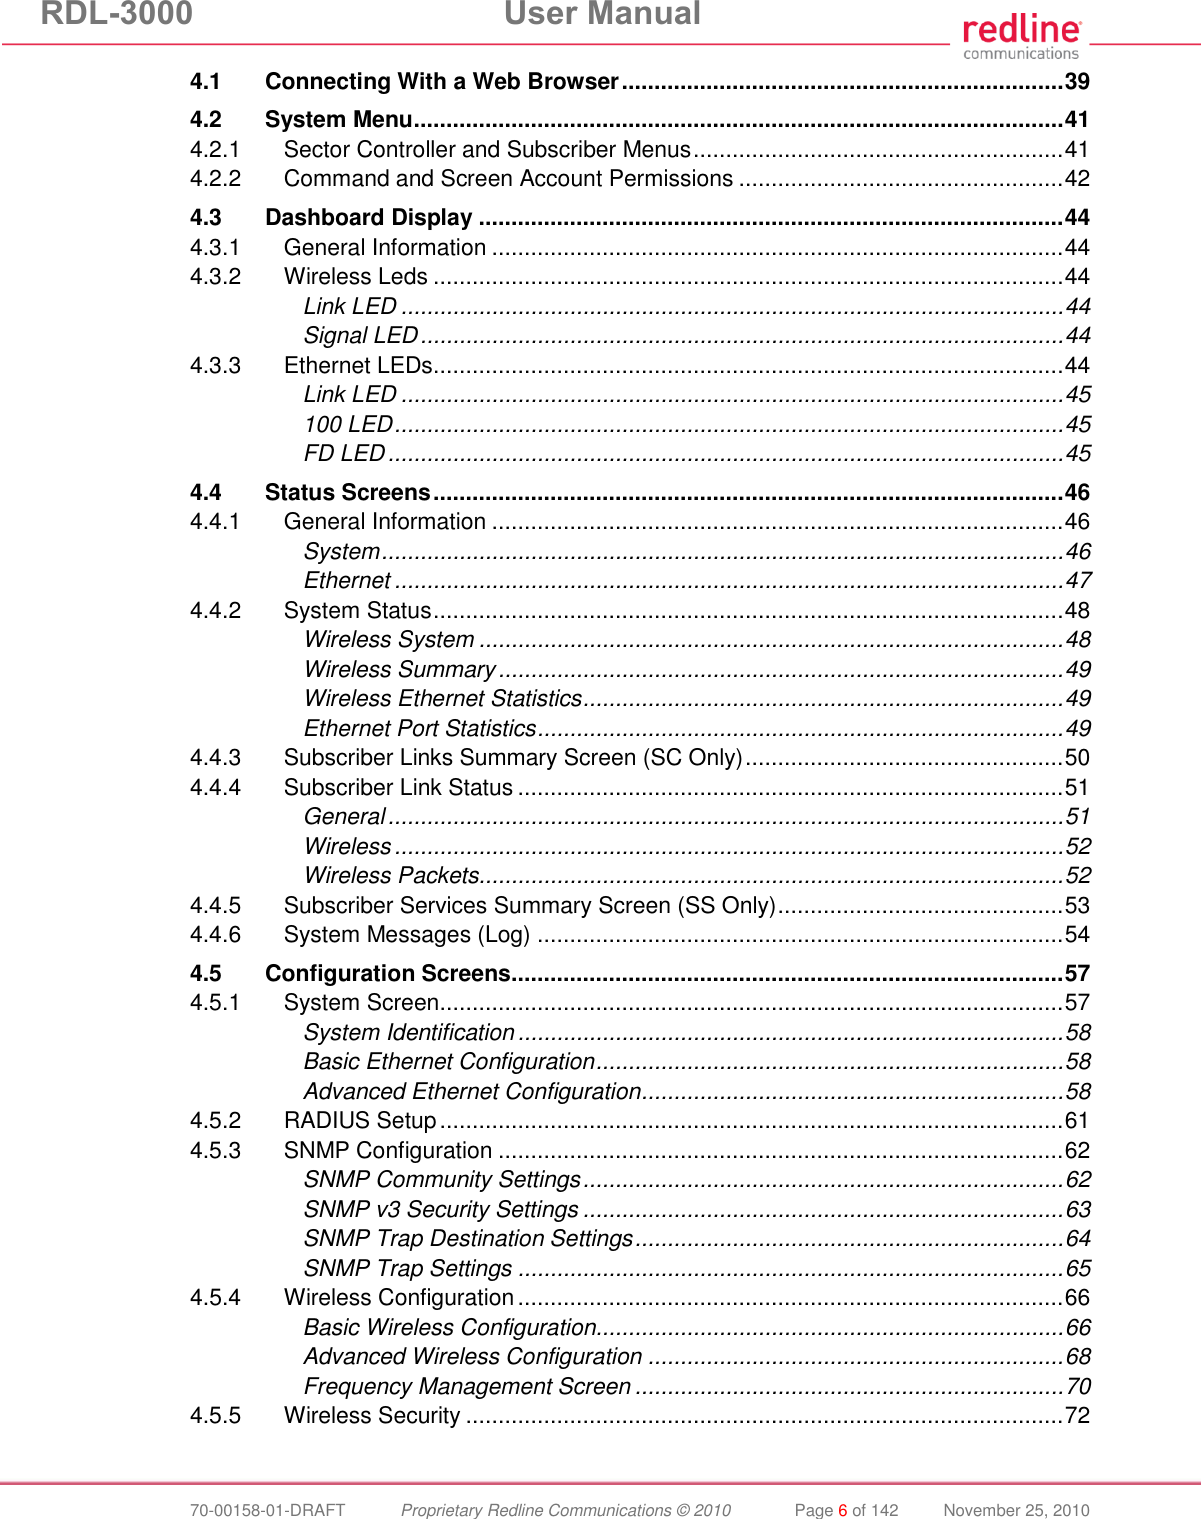 RDL-3000  User Manual  70-00158-01-DRAFT  Proprietary Redline Communications © 2010  Page 6 of 142  November 25, 2010 4.1 Connecting With a Web Browser .................................................................... 39 4.2 System Menu .................................................................................................... 41 4.2.1 Sector Controller and Subscriber Menus ......................................................... 41 4.2.2 Command and Screen Account Permissions .................................................. 42 4.3 Dashboard Display .......................................................................................... 44 4.3.1 General Information ........................................................................................ 44 4.3.2 Wireless Leds ................................................................................................. 44 Link LED ...................................................................................................... 44 Signal LED ................................................................................................... 44 4.3.3 Ethernet LEDs ................................................................................................. 44 Link LED ...................................................................................................... 45 100 LED ....................................................................................................... 45 FD LED ........................................................................................................ 45 4.4 Status Screens ................................................................................................. 46 4.4.1 General Information ........................................................................................ 46 System ......................................................................................................... 46 Ethernet ....................................................................................................... 47 4.4.2 System Status ................................................................................................. 48 Wireless System .......................................................................................... 48 Wireless Summary ....................................................................................... 49 Wireless Ethernet Statistics .......................................................................... 49 Ethernet Port Statistics ................................................................................. 49 4.4.3 Subscriber Links Summary Screen (SC Only) ................................................. 50 4.4.4 Subscriber Link Status .................................................................................... 51 General ........................................................................................................ 51 Wireless ....................................................................................................... 52 Wireless Packets .......................................................................................... 52 4.4.5 Subscriber Services Summary Screen (SS Only) ............................................ 53 4.4.6 System Messages (Log) ................................................................................. 54 4.5 Configuration Screens ..................................................................................... 57 4.5.1 System Screen ................................................................................................ 57 System Identification .................................................................................... 58 Basic Ethernet Configuration ........................................................................ 58 Advanced Ethernet Configuration ................................................................. 58 4.5.2 RADIUS Setup ................................................................................................ 61 4.5.3 SNMP Configuration ....................................................................................... 62 SNMP Community Settings .......................................................................... 62 SNMP v3 Security Settings .......................................................................... 63 SNMP Trap Destination Settings .................................................................. 64 SNMP Trap Settings .................................................................................... 65 4.5.4 Wireless Configuration .................................................................................... 66 Basic Wireless Configuration........................................................................ 66 Advanced Wireless Configuration ................................................................ 68 Frequency Management Screen .................................................................. 70 4.5.5 Wireless Security ............................................................................................ 72 